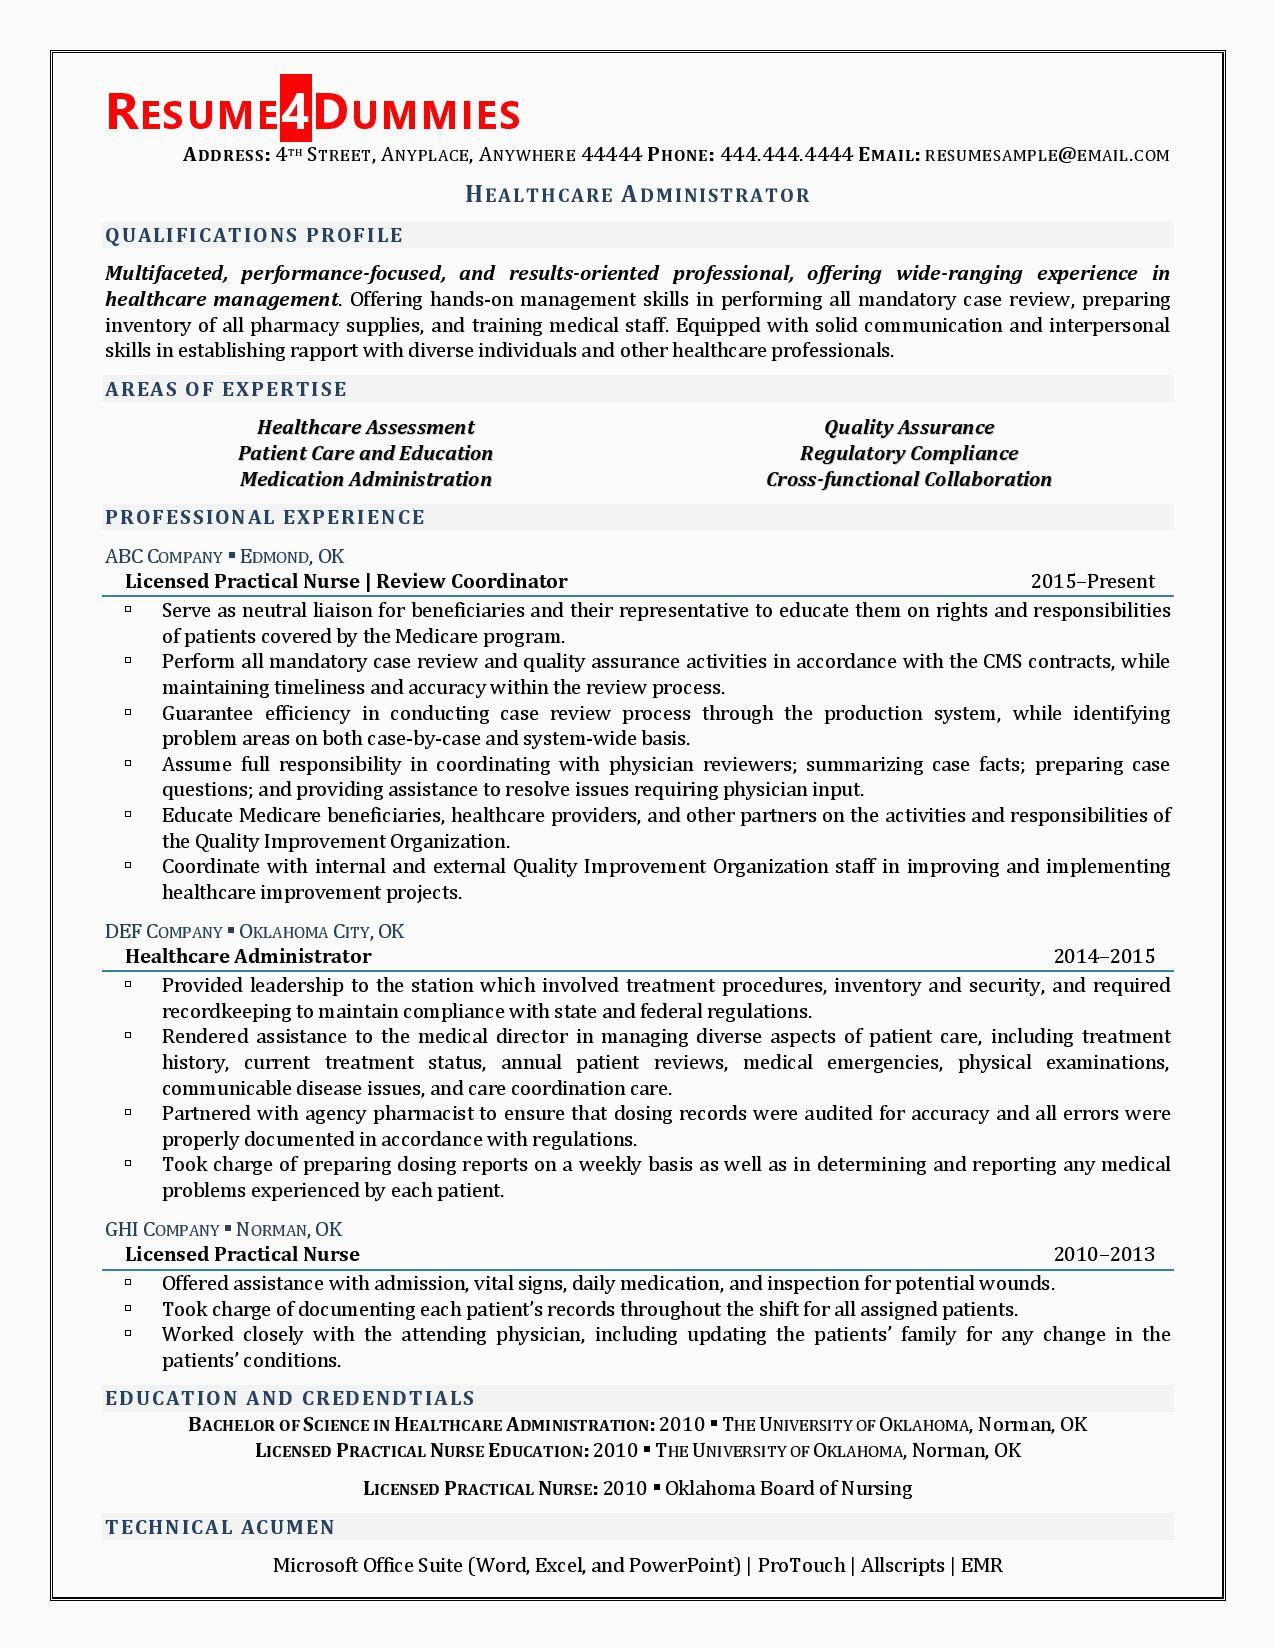 healthcare administrator resume examples 3